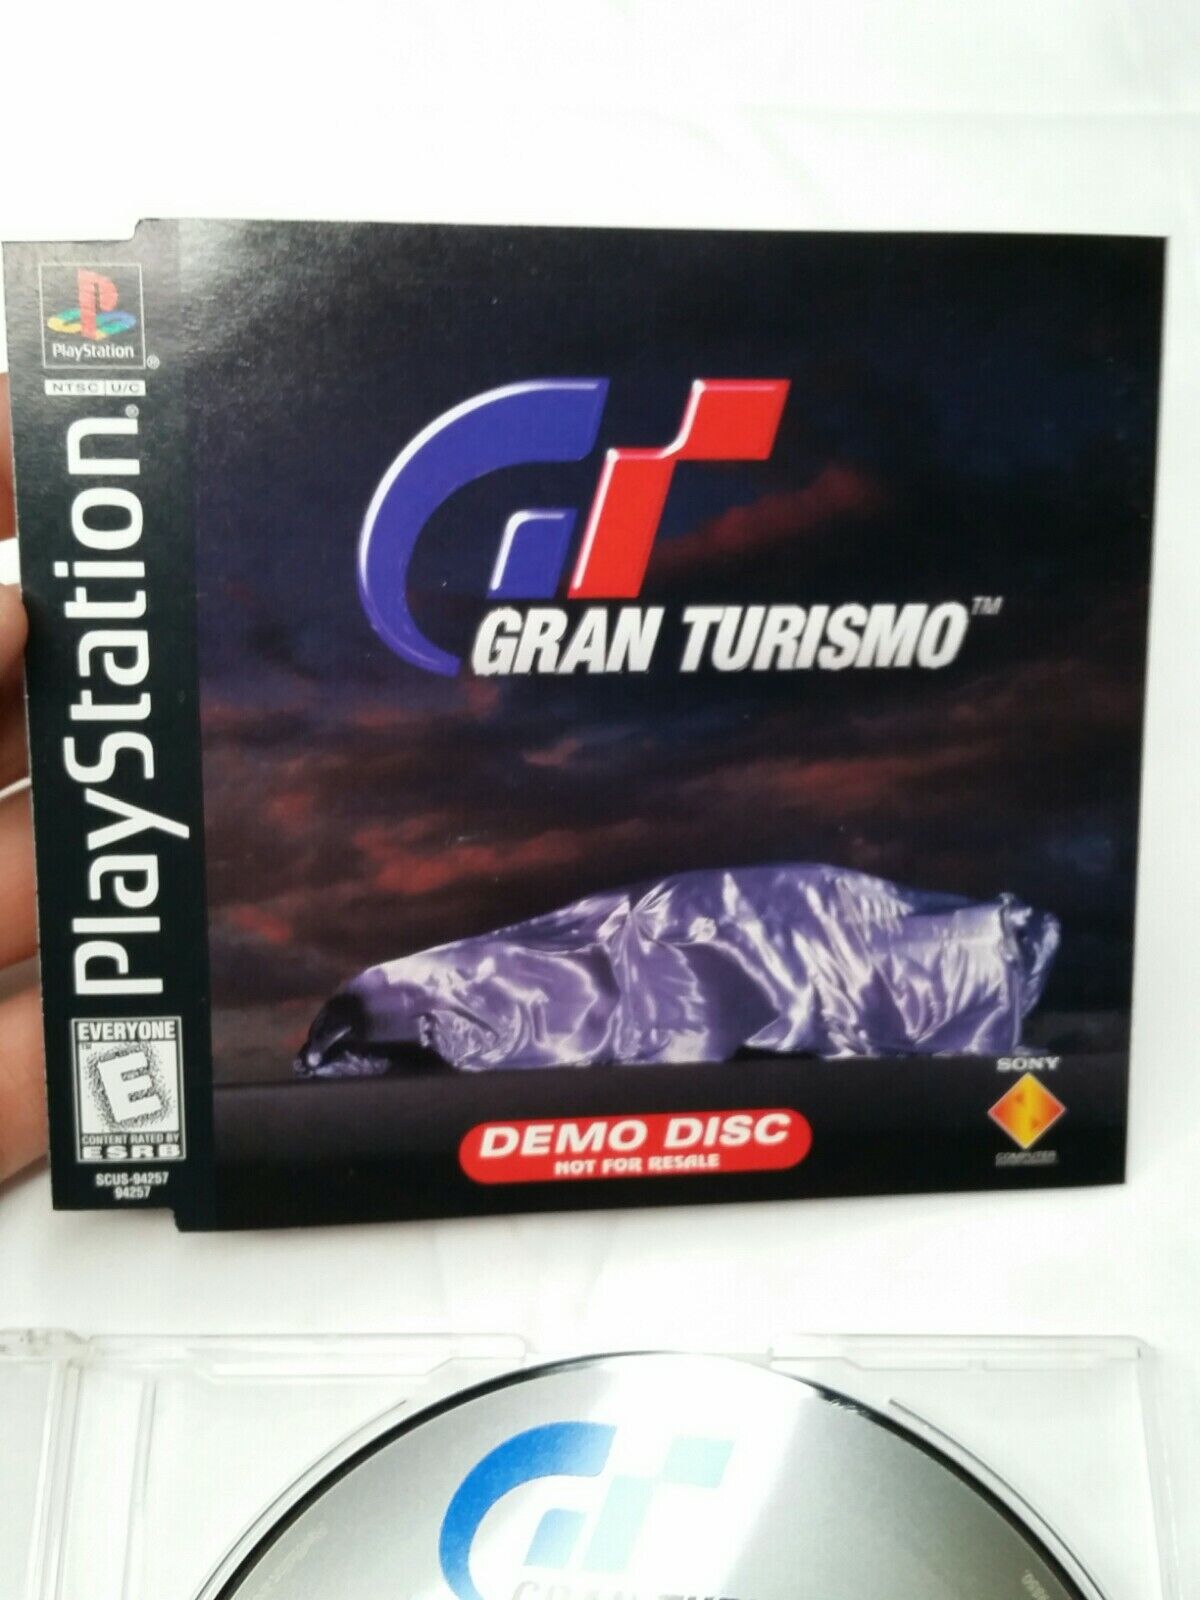 RARE Gran Turismo Sony Playstation 1 PS1 Demo Disc Not For Resale Near Mint